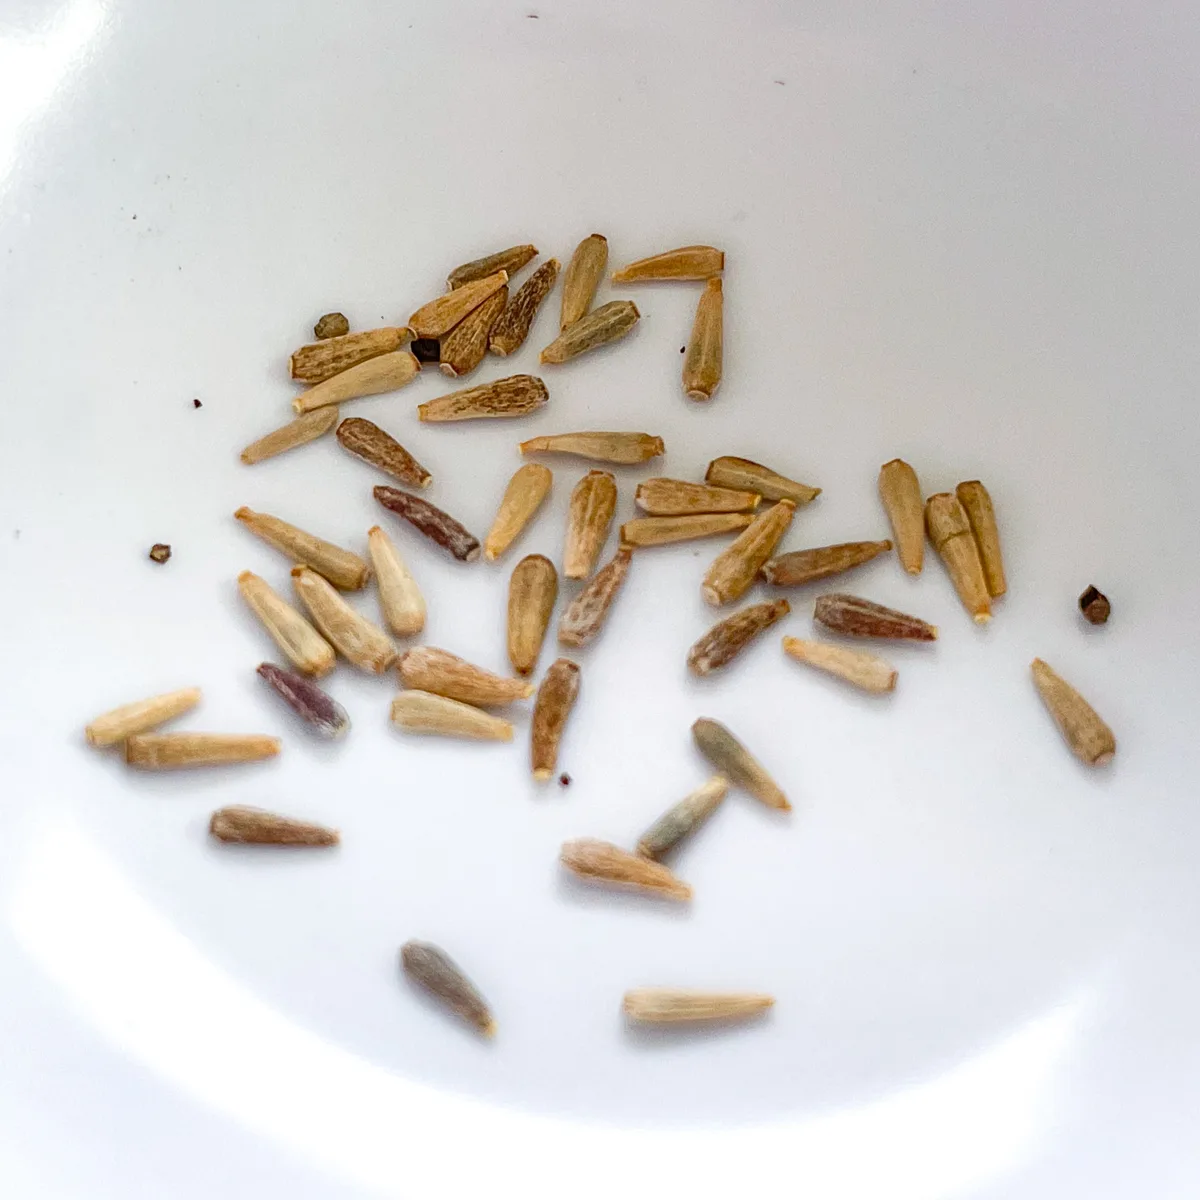 aster seeds in white bowl